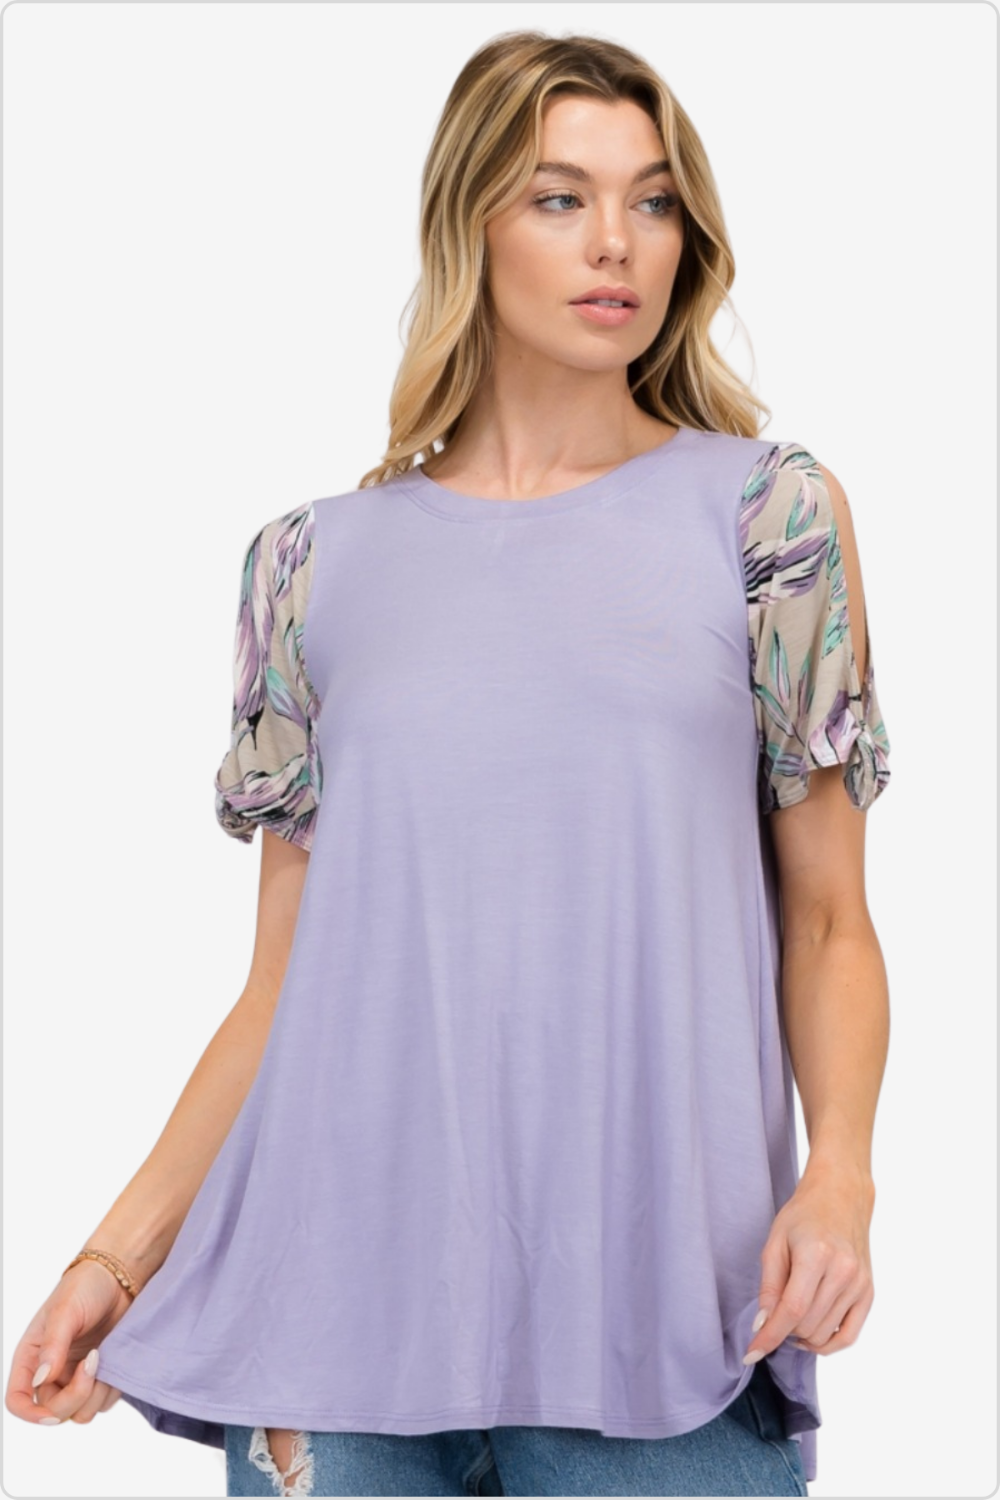 Woman sporting a soft lavender blouse with floral sleeve accents, perfect for a light summer vibe.